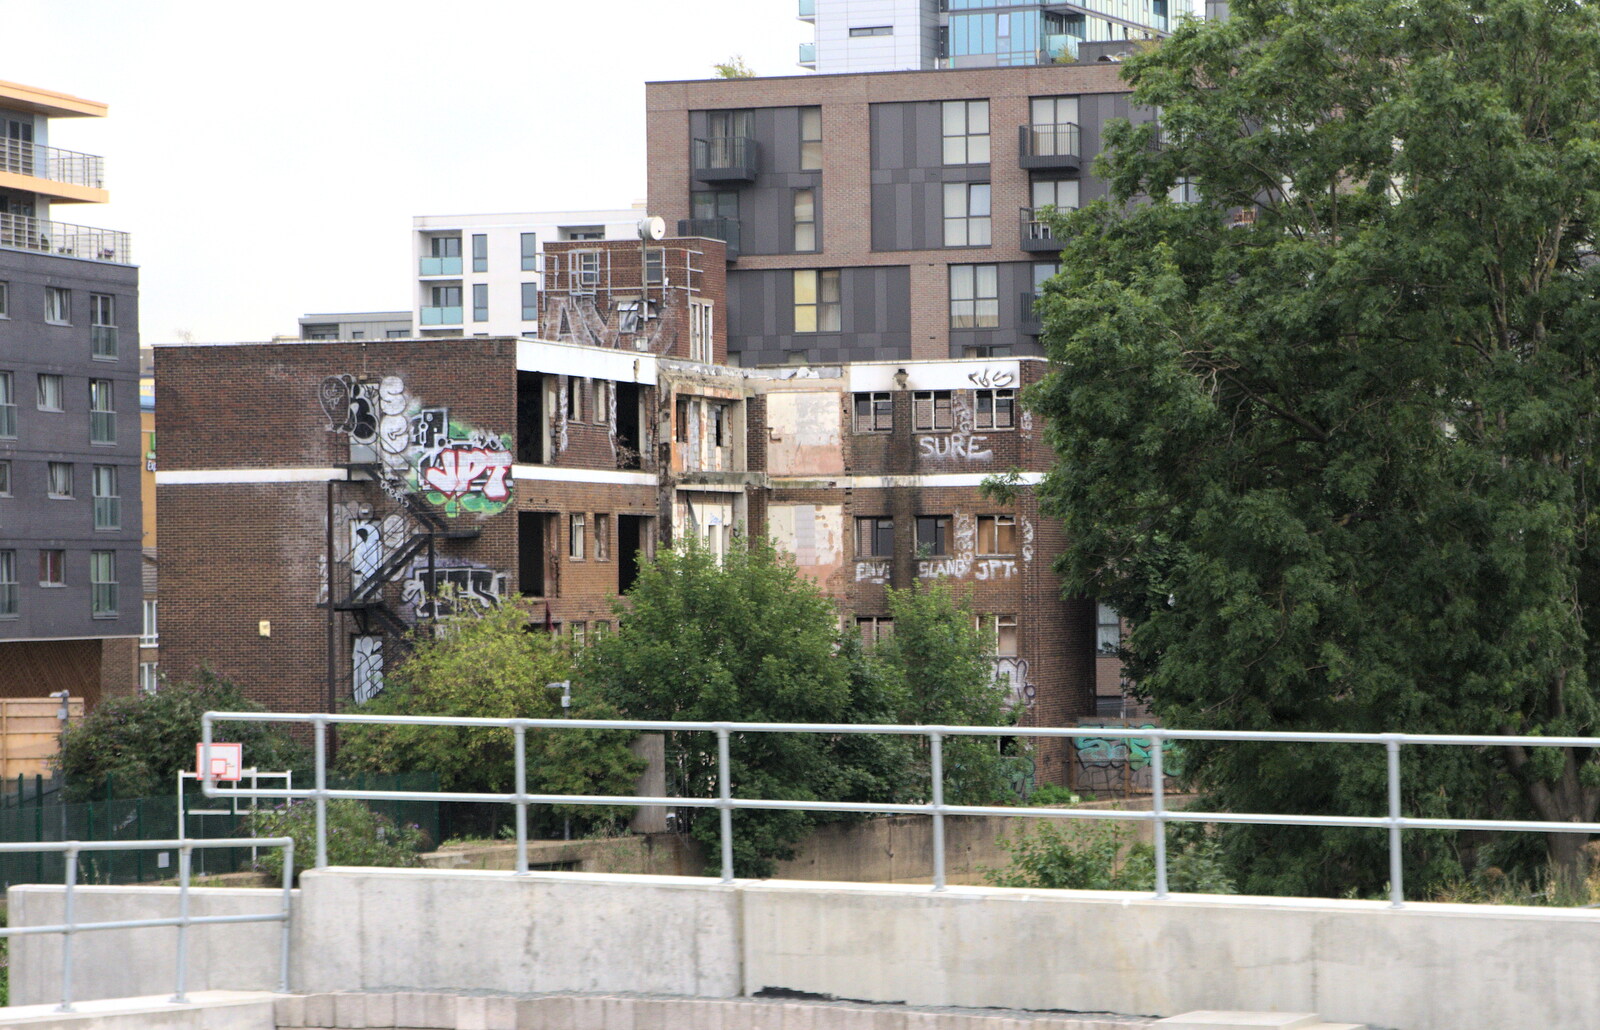 Burned-out building on the edge of Stratford from Fred's Cast and a SwiftKey Lunch, Waterloo, London - 18th August 2015